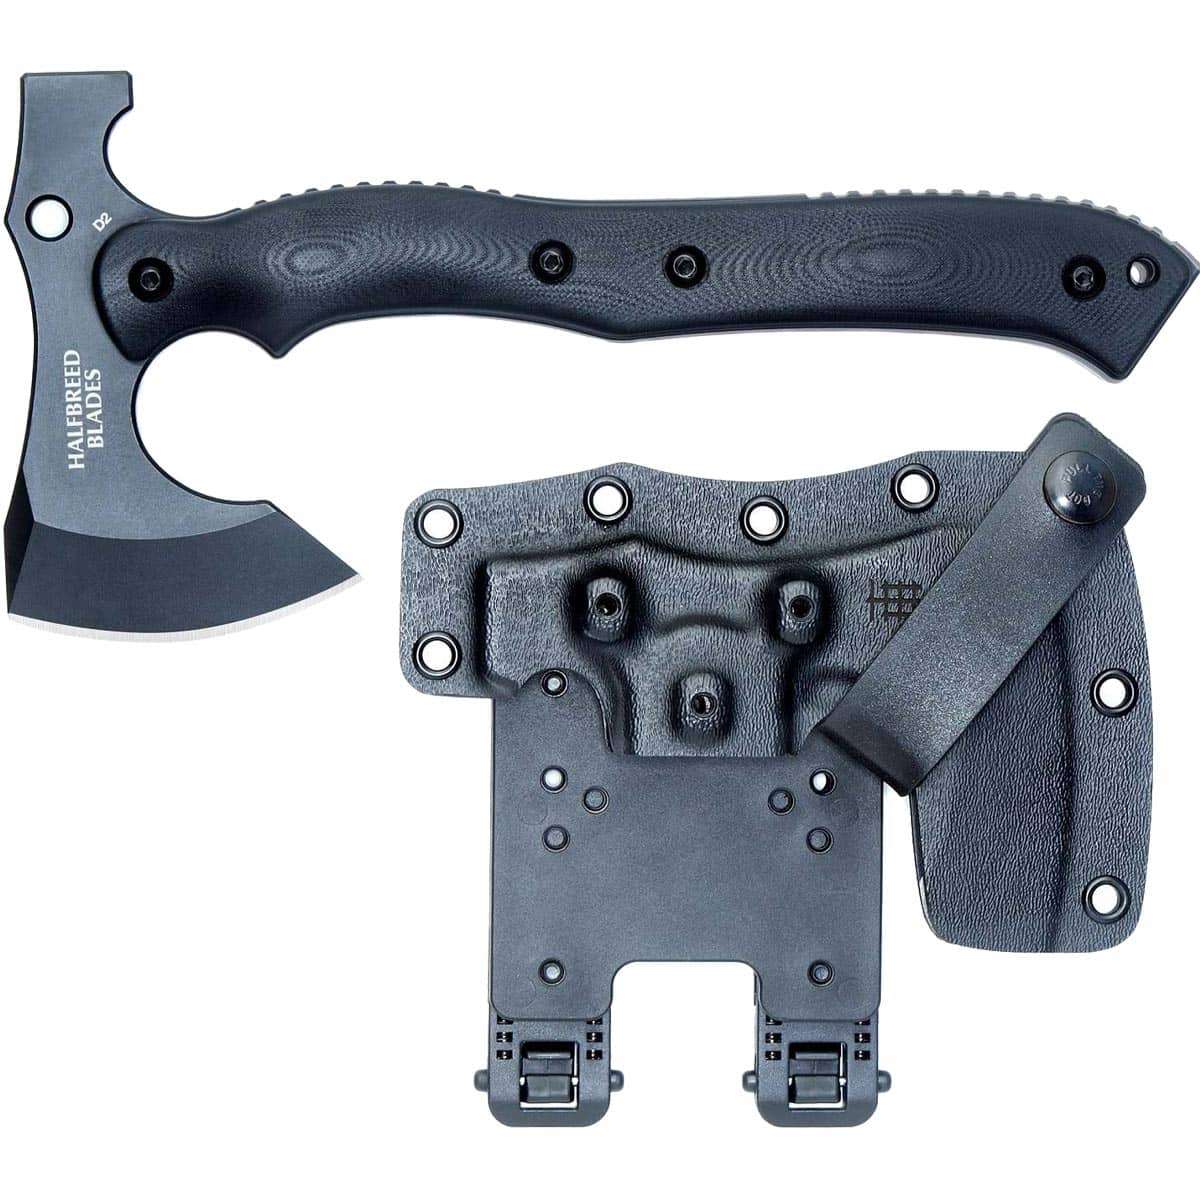 HalfBreed Compact Rescue Axe Hammer CRA-01